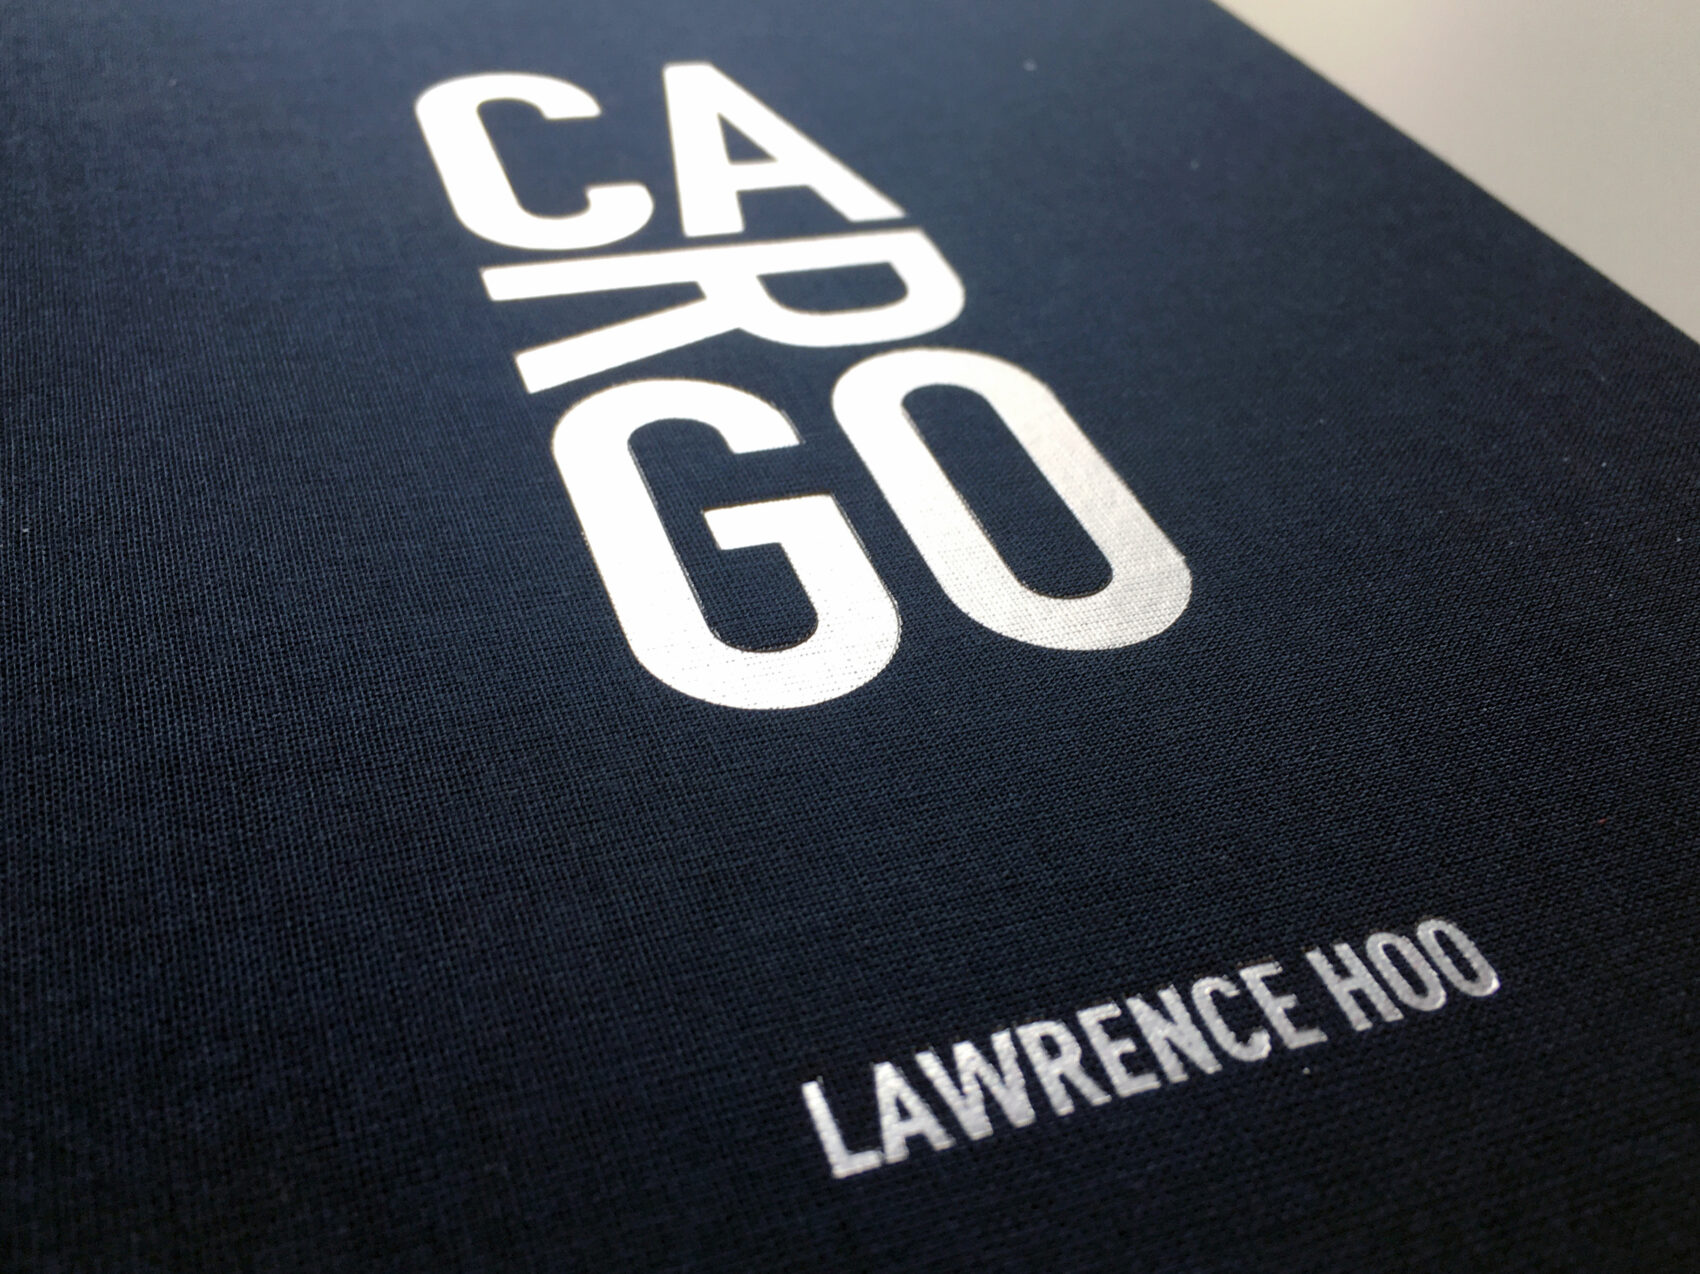 CARGO (Charting African Resilience Generating Opportunities), Lawrence Hoo. Design by VIKA.